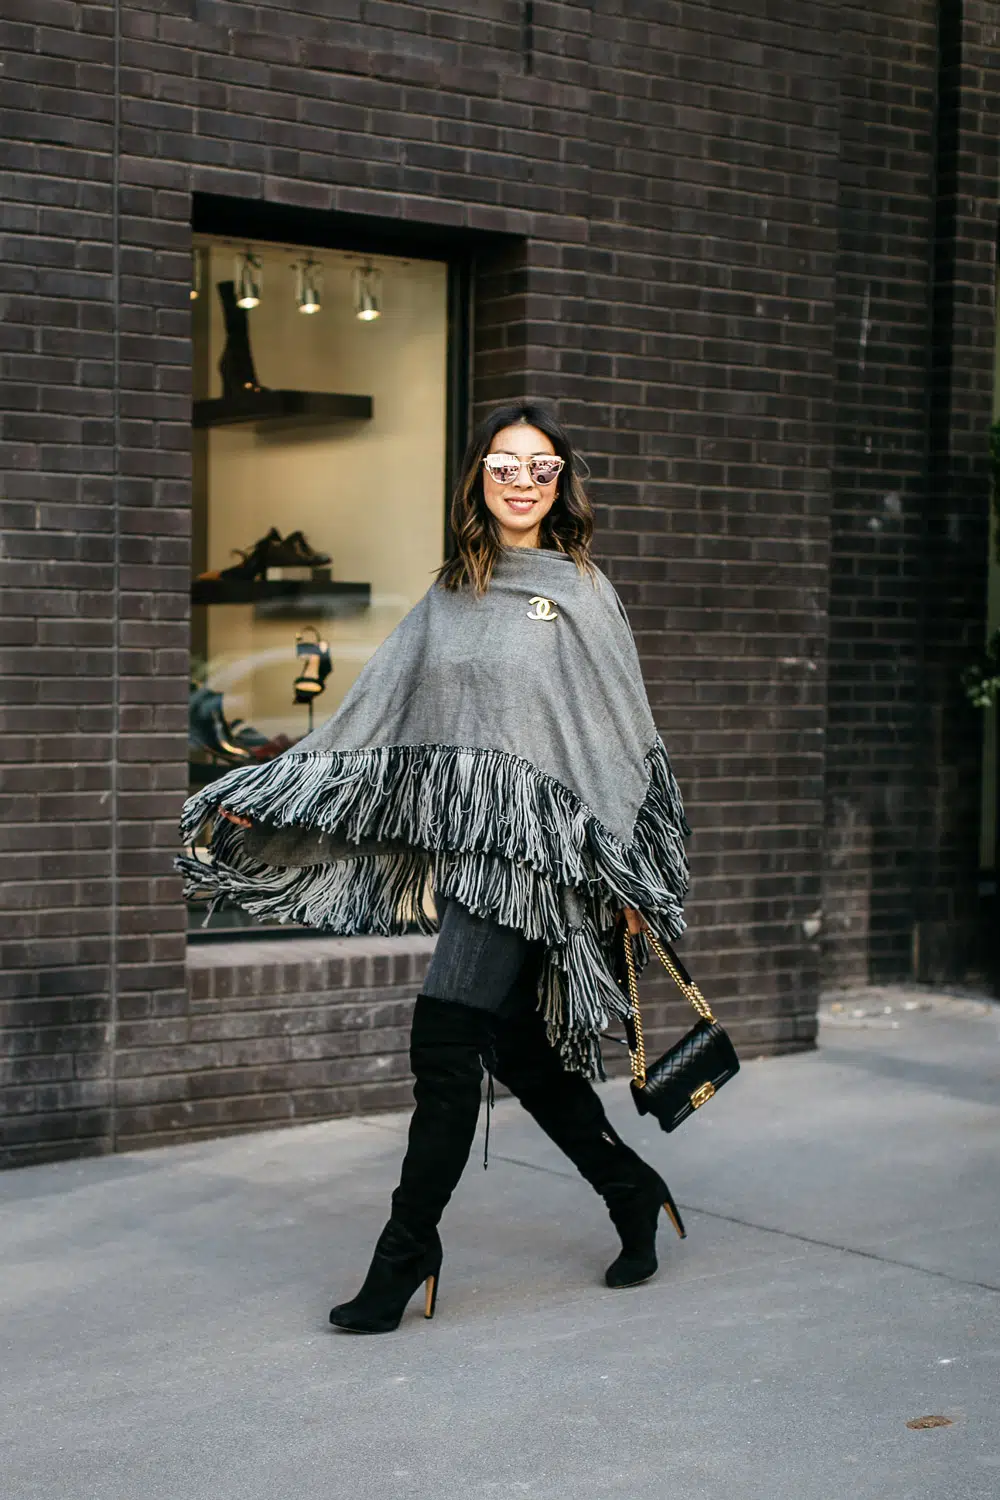 How to style a poncho, how to wear a poncho, wearing a poncho for fall, wearing a poncho in winter, what to wear under a poncho, modern poncho looks, how to put on a poncho, how to wear an asymmetrical poncho, sam stewart, style of sam, erin Busbee, fashion blogger over 40, Busbee style, telluride, Colorado